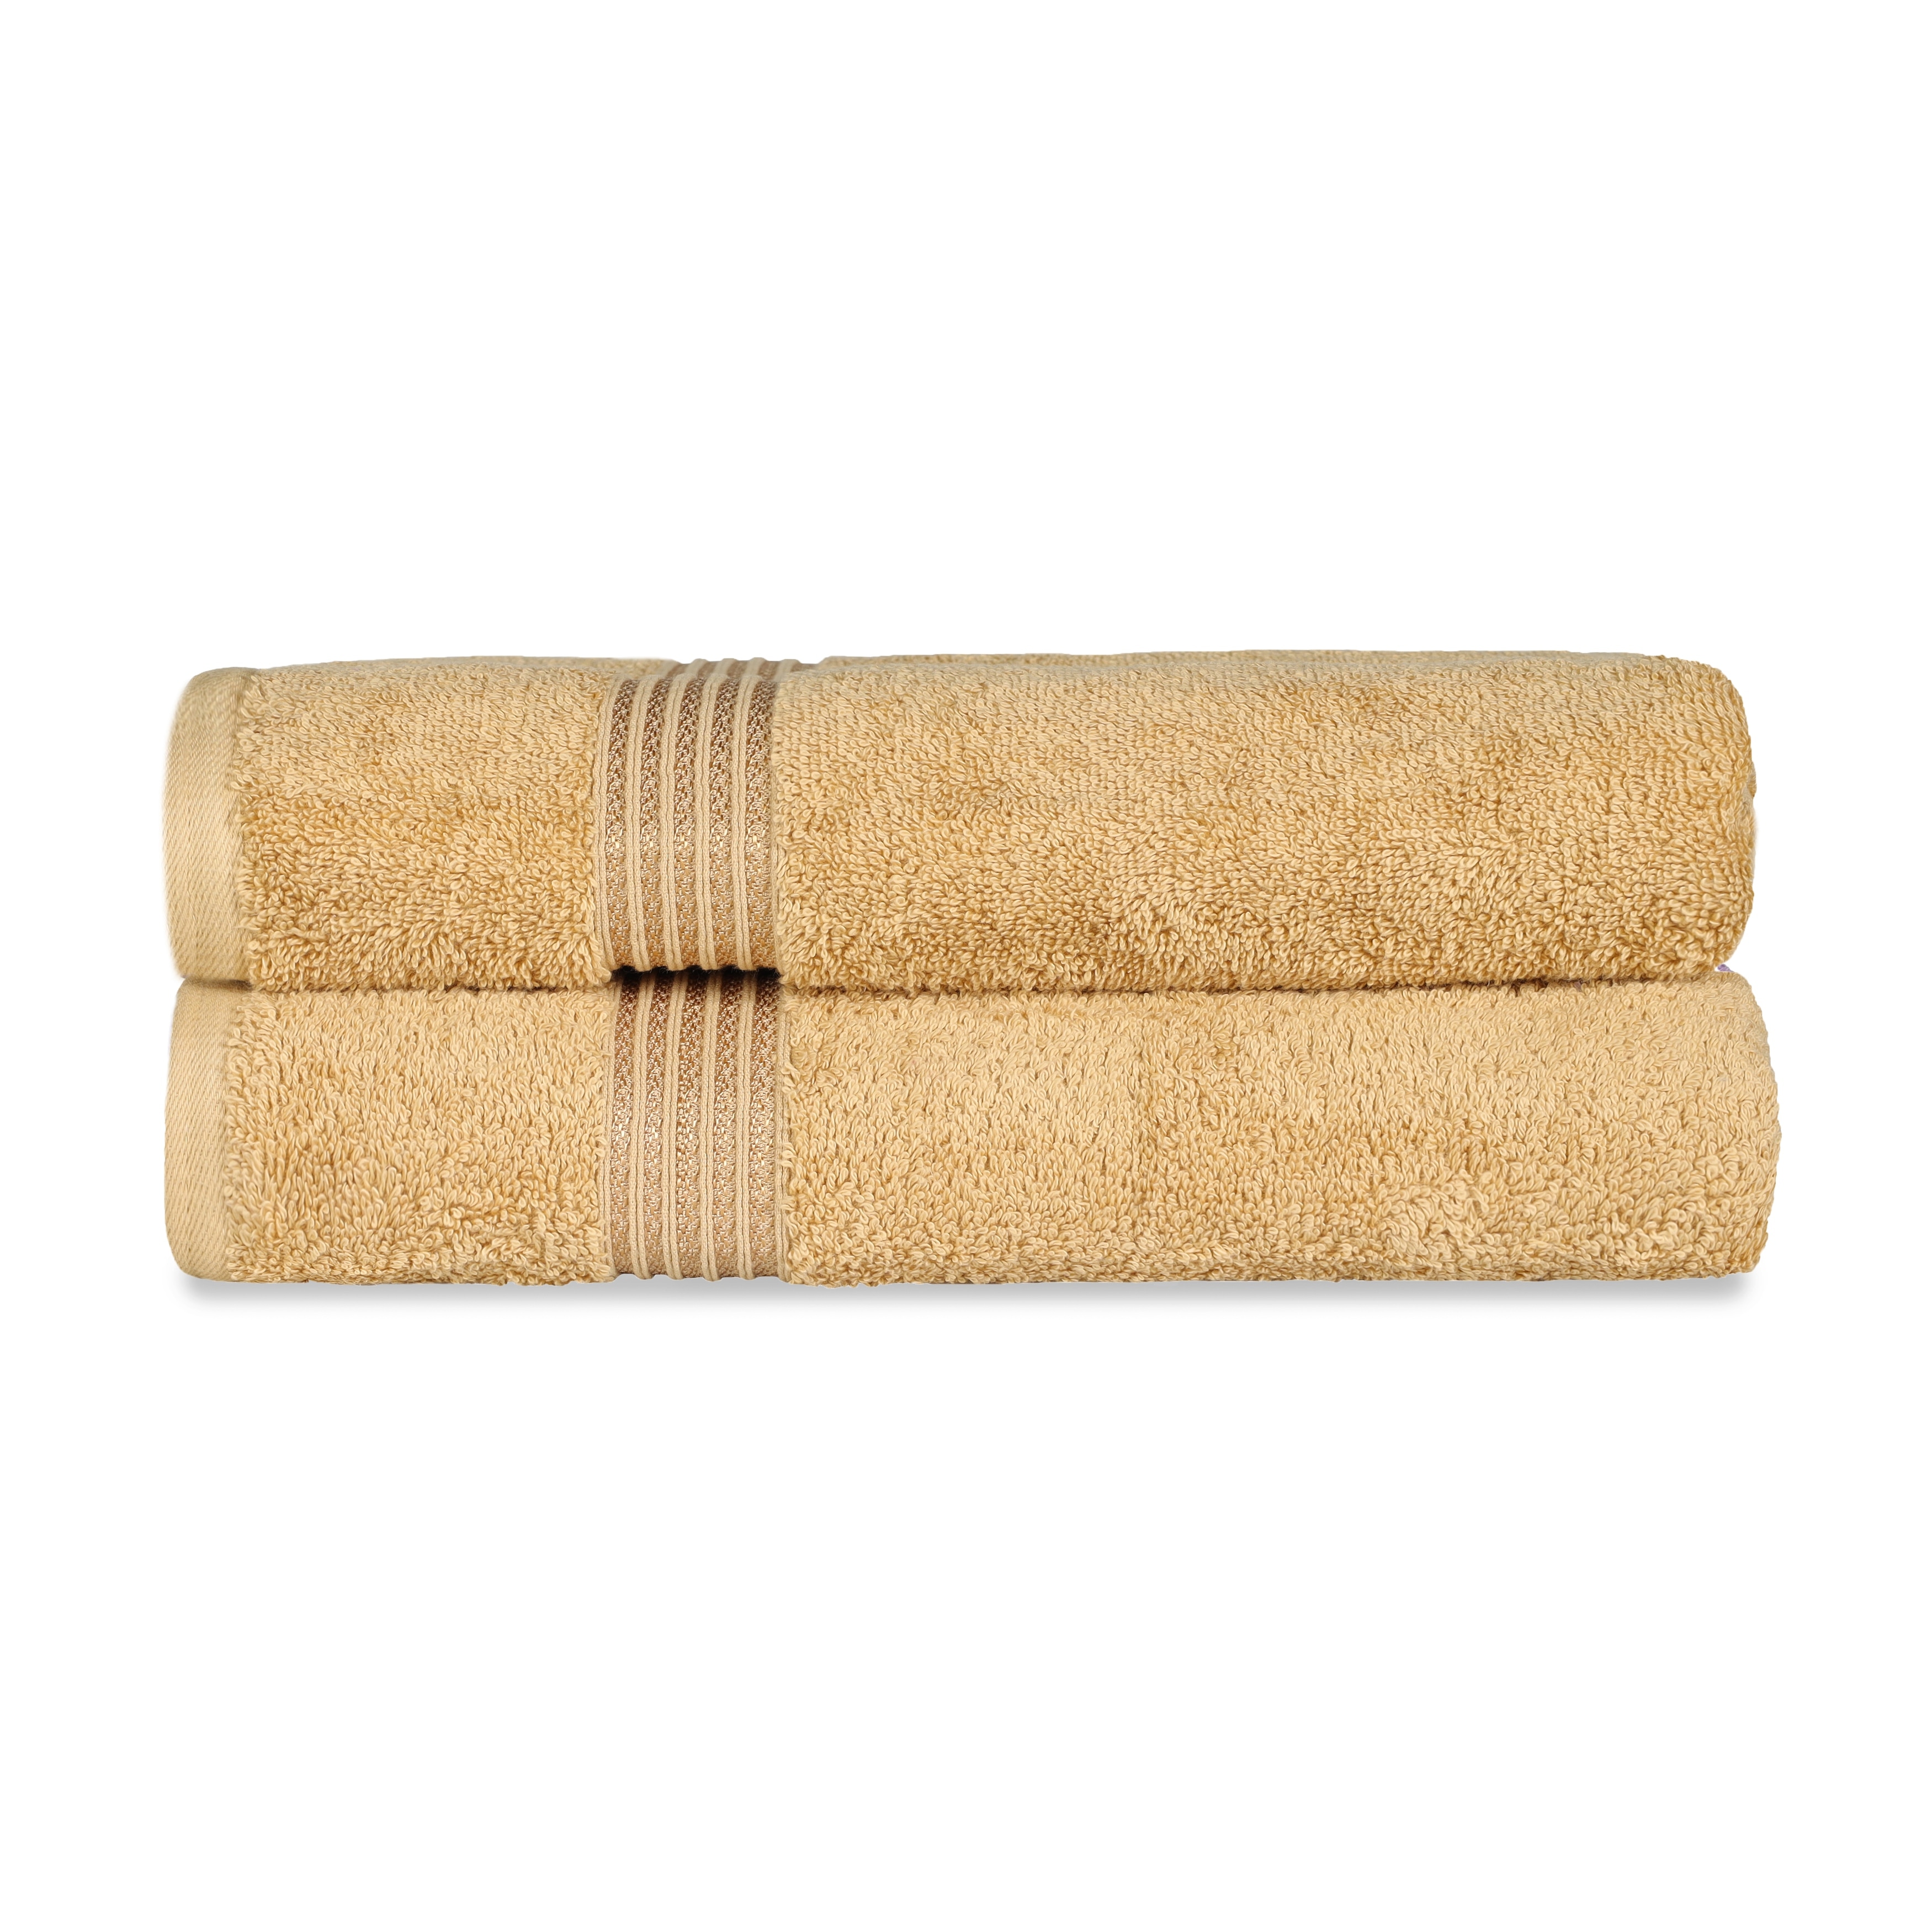 Aten Homeware Luxury Egyptian Cotton Bath Towels Extra Large - 600 GSM 2 Pieces of 26x54 Inches Bath Sheets - Highly Absorbent and Quick Dry Towel